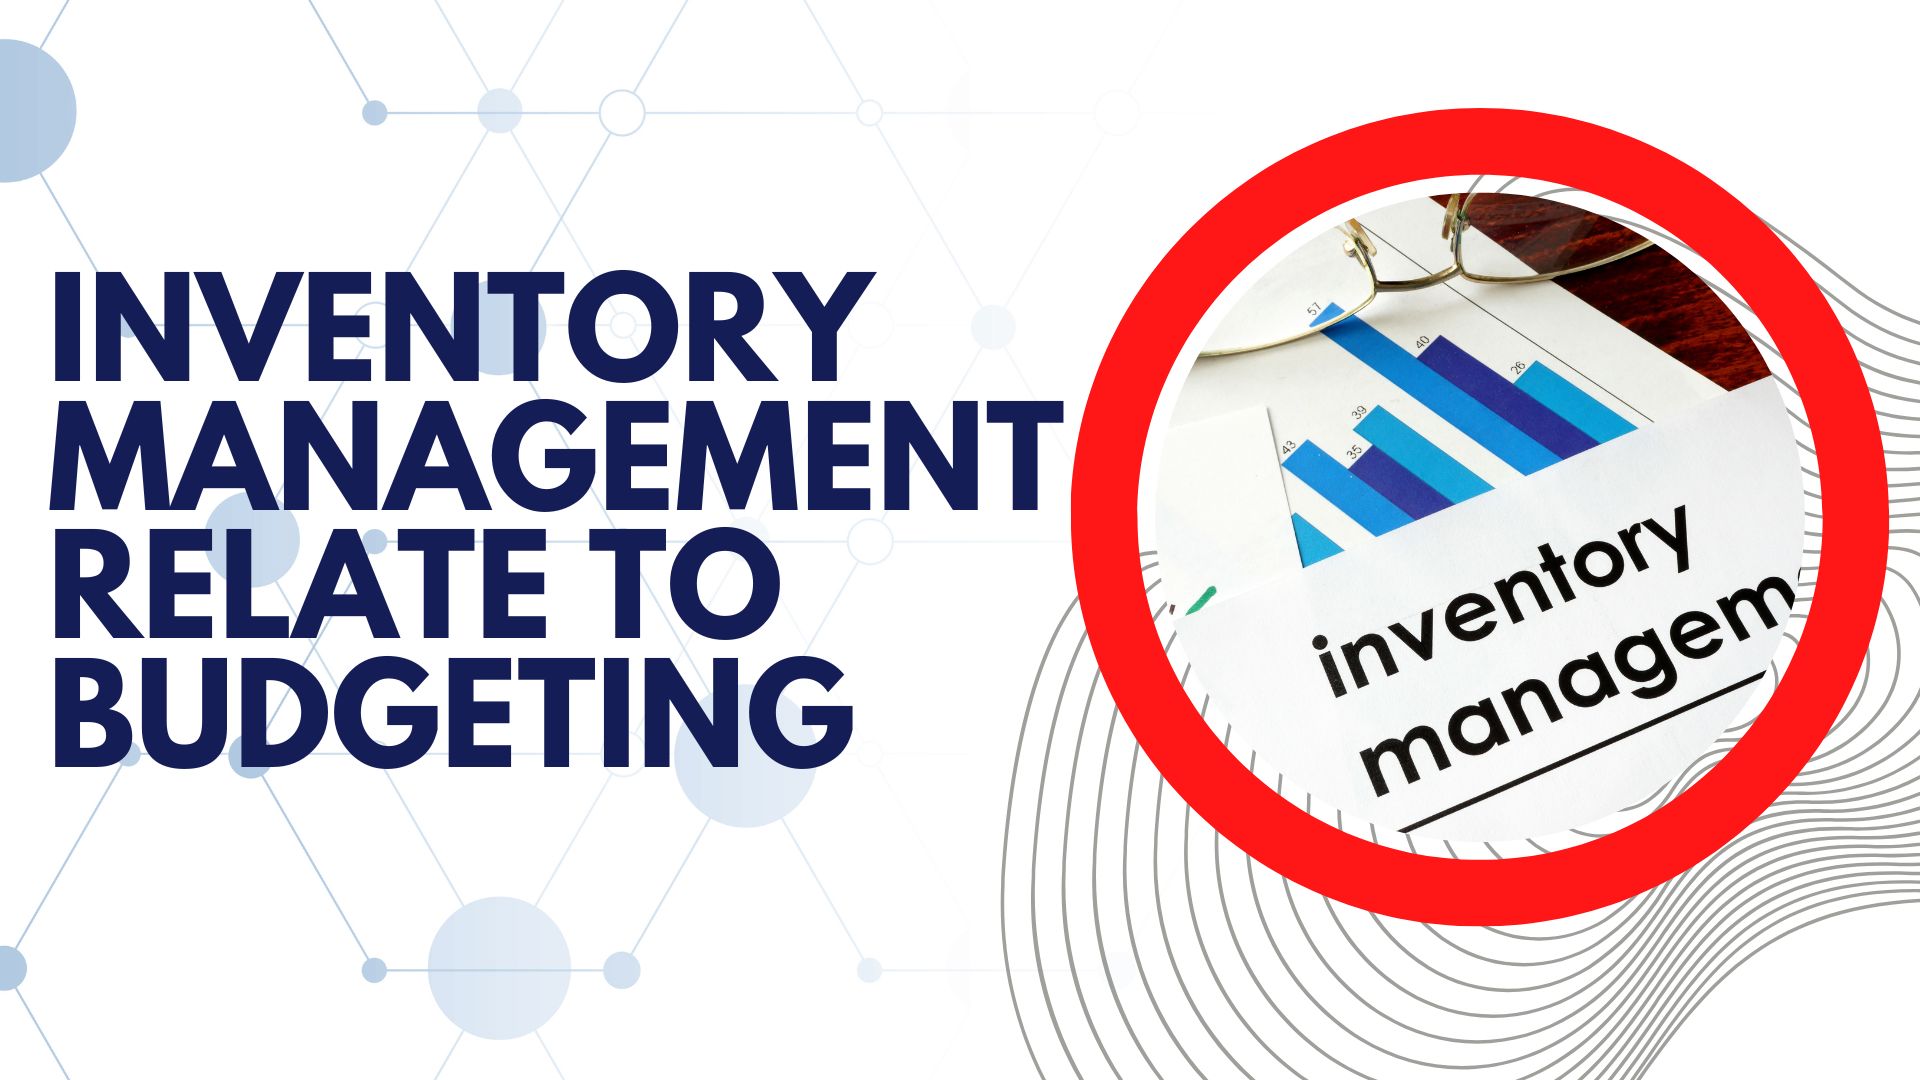 How Does Inventory Management Relate to Budgeting